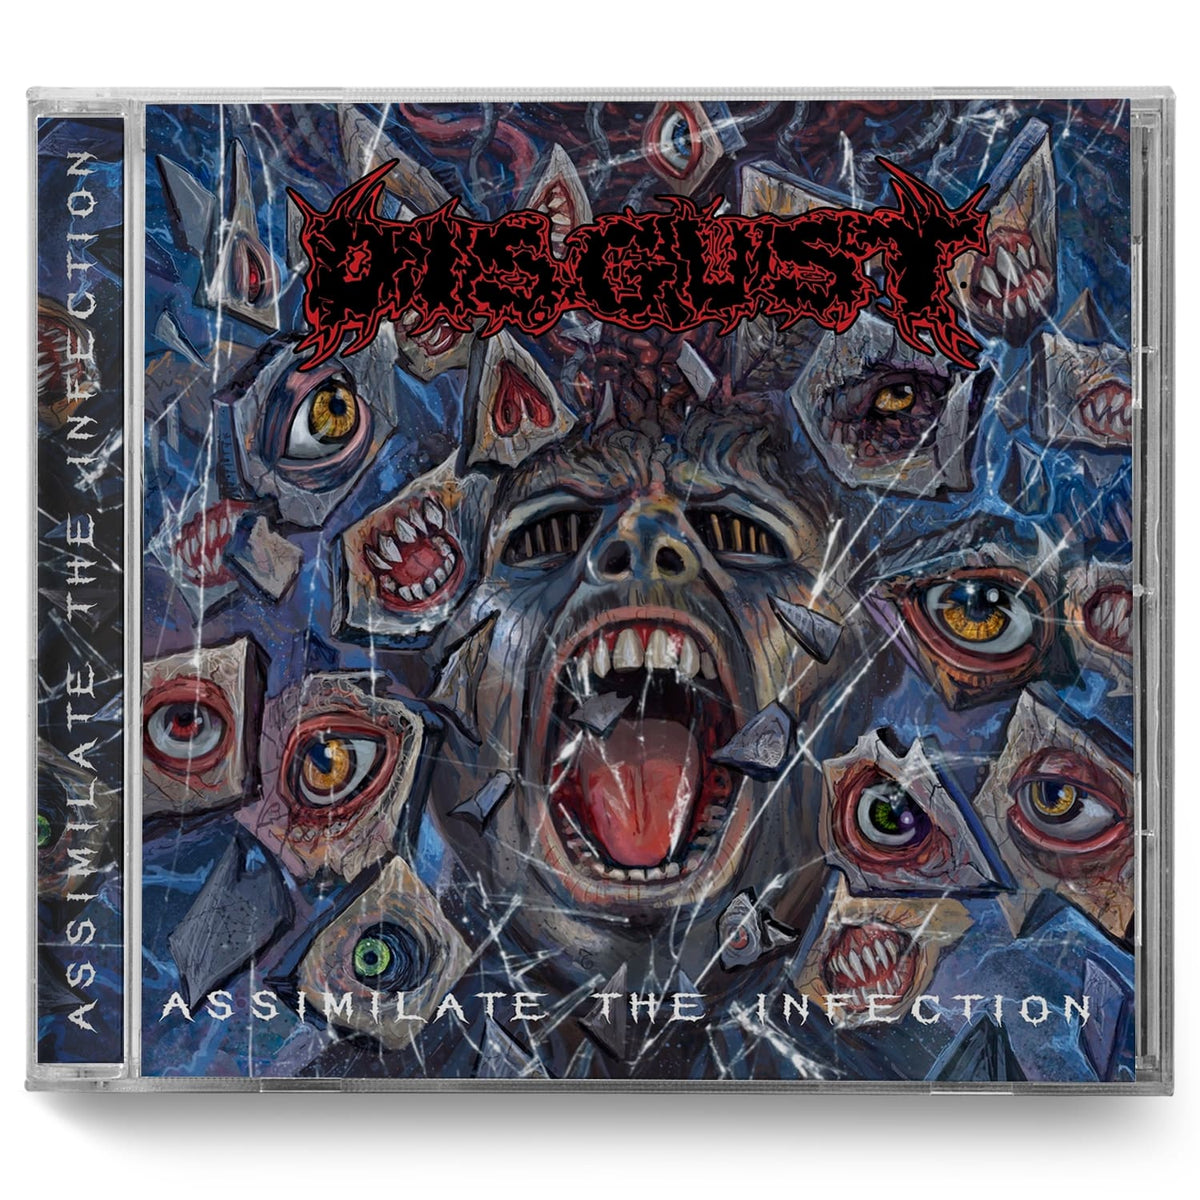 Disgust "Assimilate the Infection" CD - Miasma Records